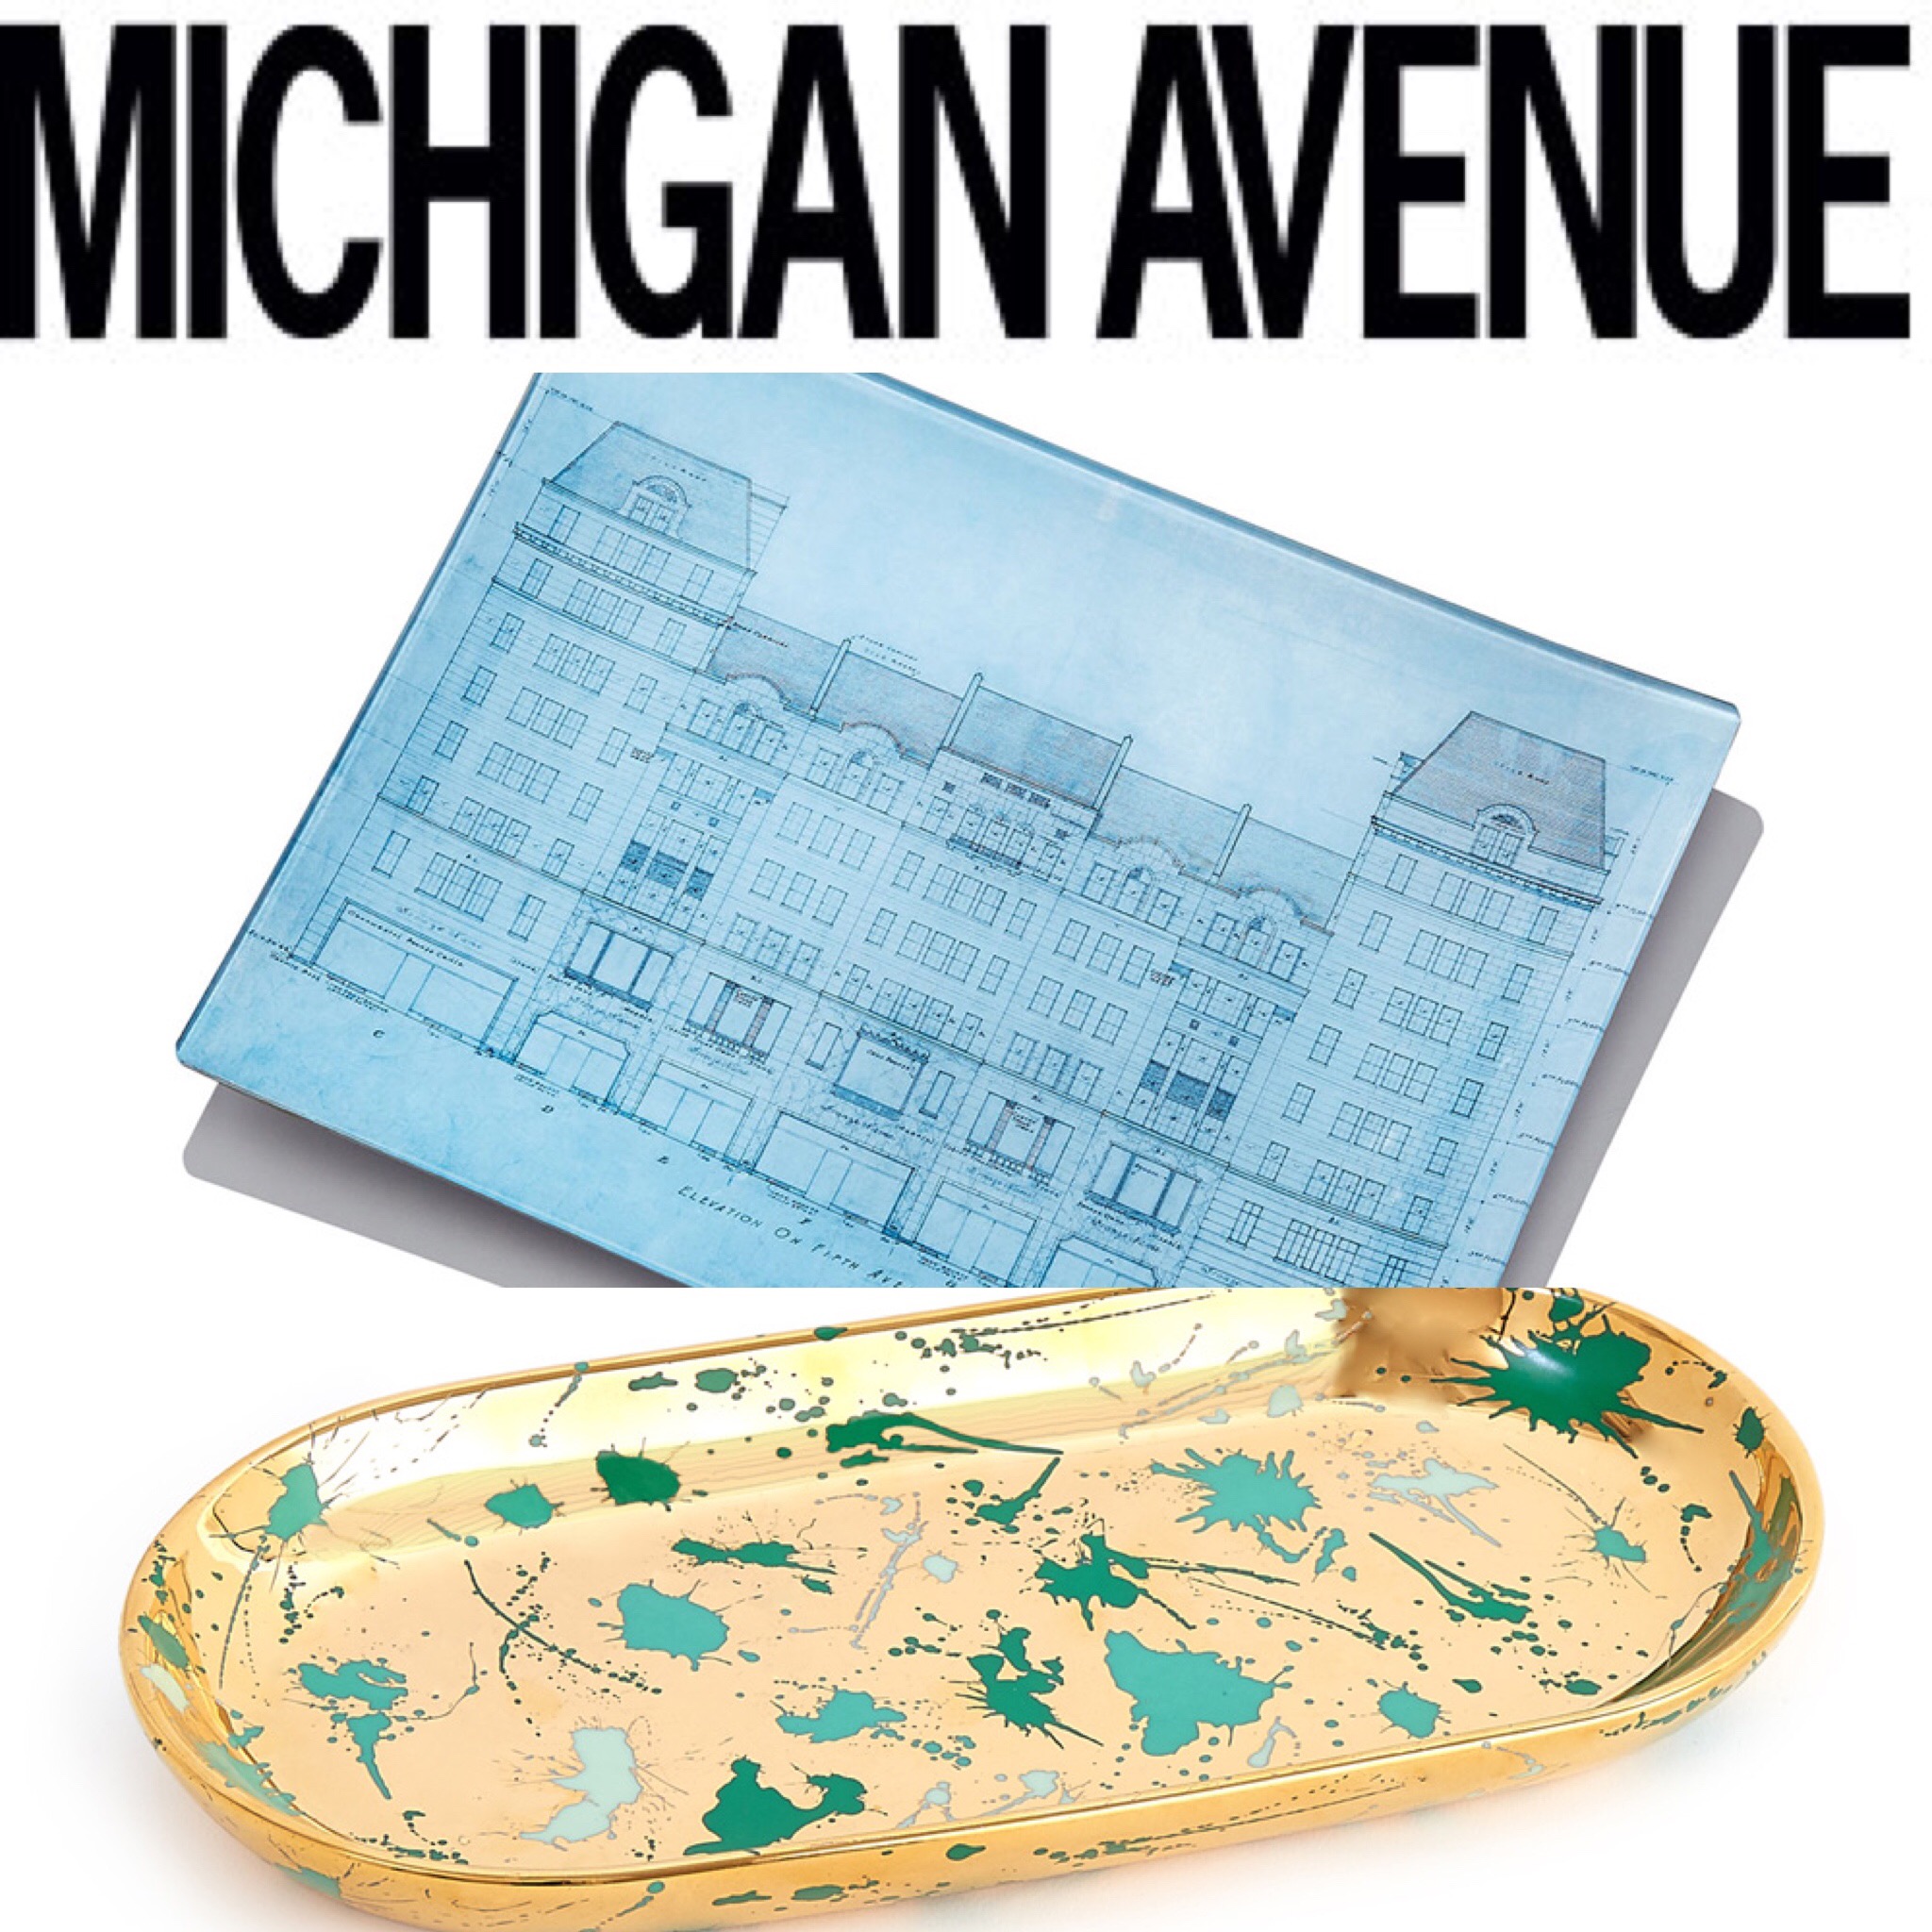  https://michiganavemag.com/chic-catch-all-trays-for-your-home 